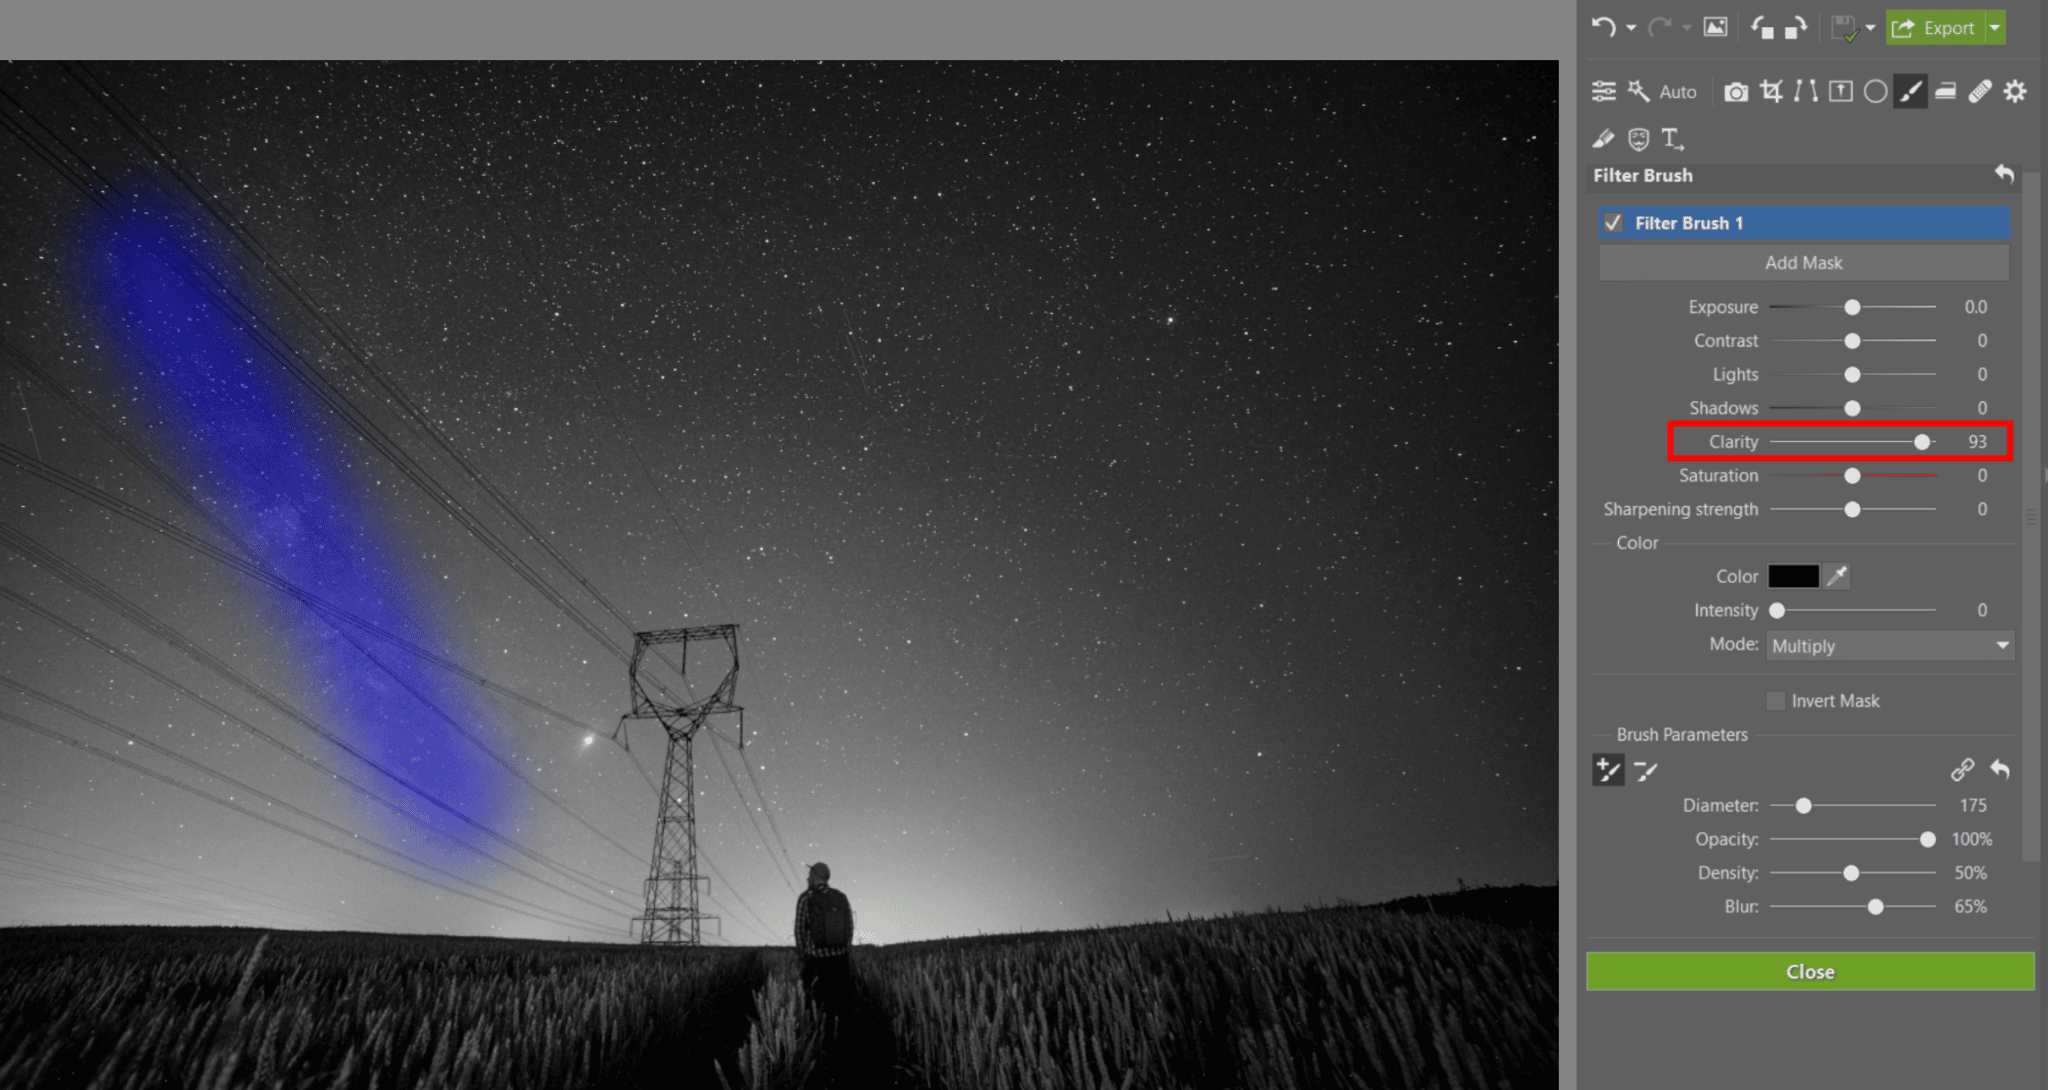 Night-sky Photos: 7 Edits (+1 More) That Will Definitely Spice Them Up